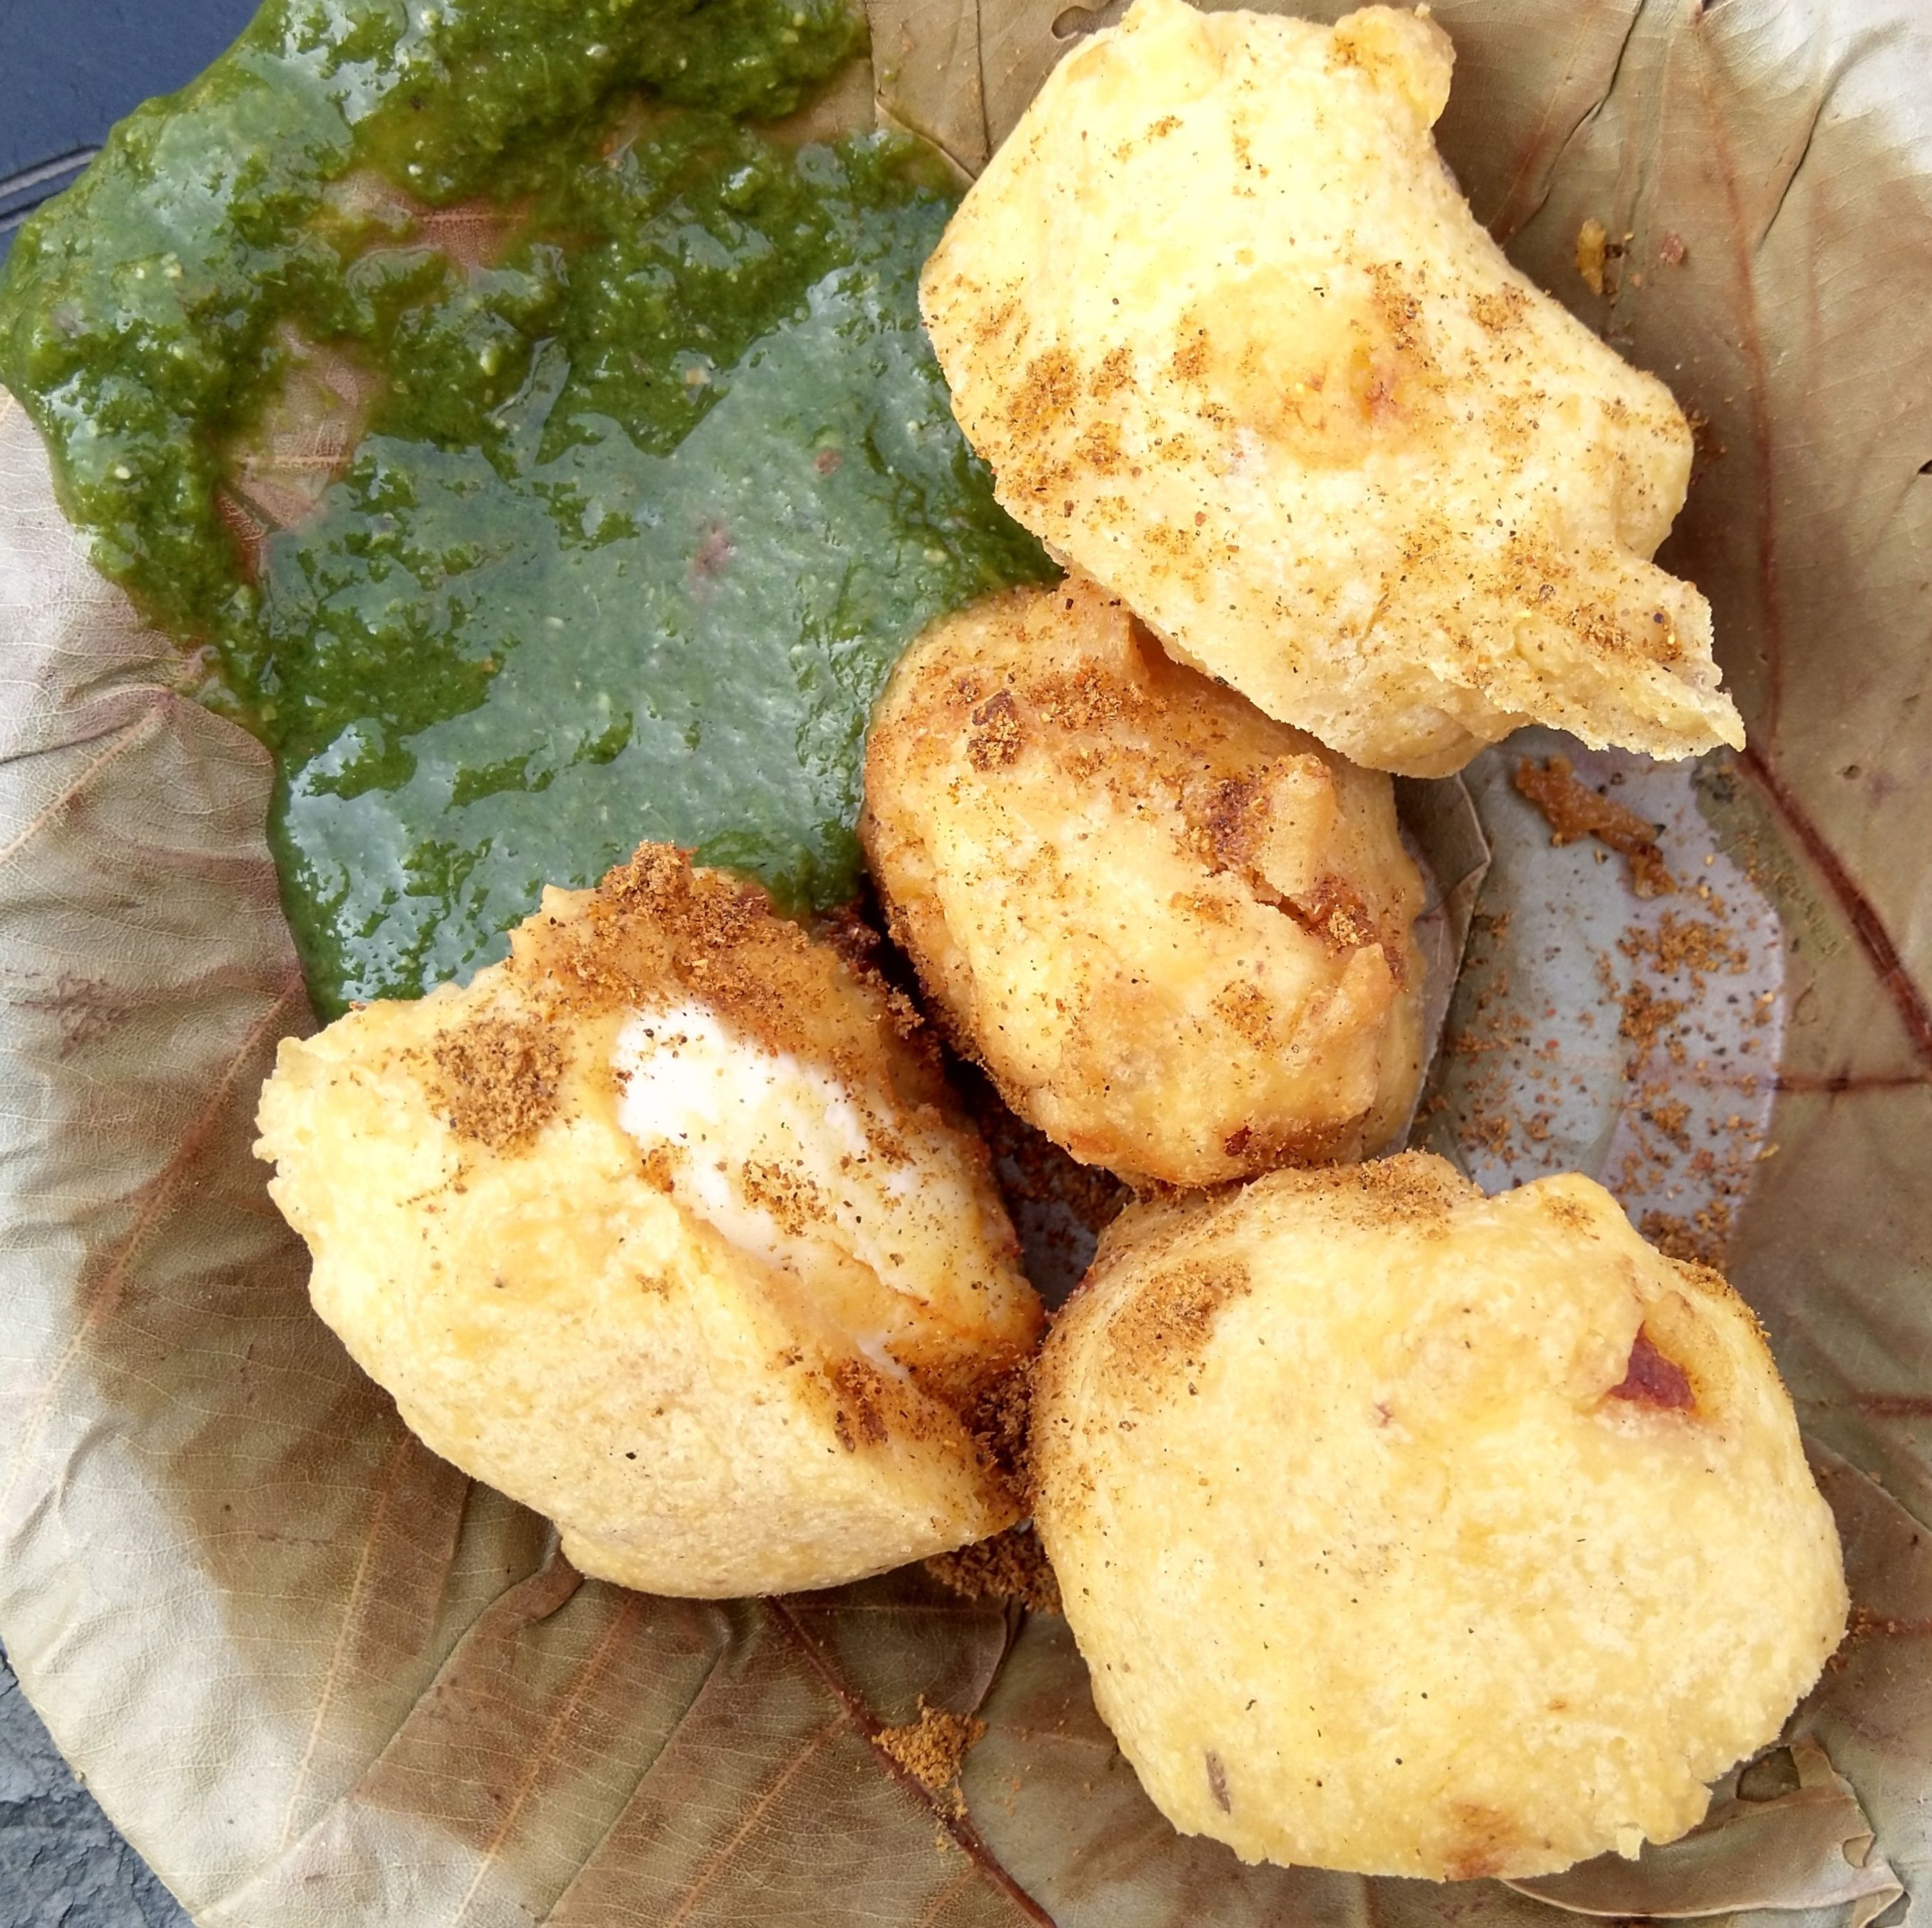 These are paneer pakoras one of my favourite, with chutney made of corriander,  green mint, chilly etc. Paneer pakoras can be made by cheese balls dipped in  gram flour paste & then deep fried. You can add salt and spices as per your taste. Visit hlthyfoodindia.blogspot.com